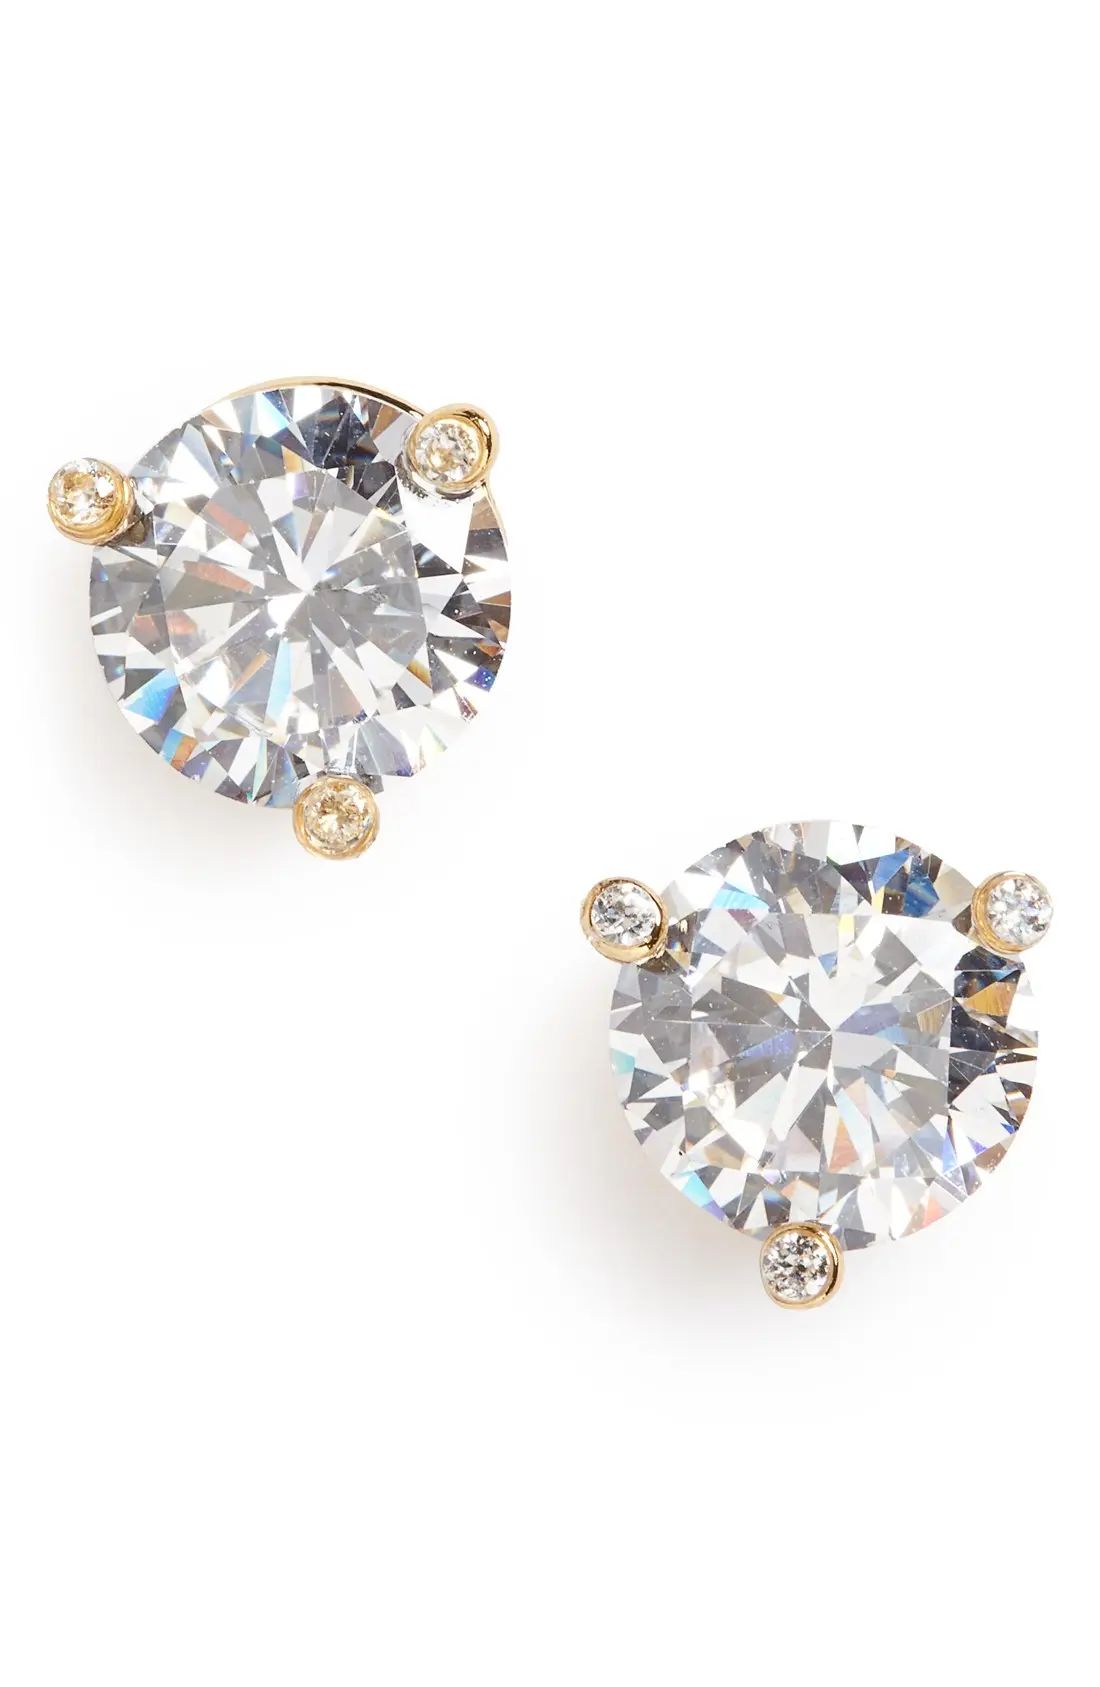 kate spade new york 'rise and shine' stud earrings | Nordstrom